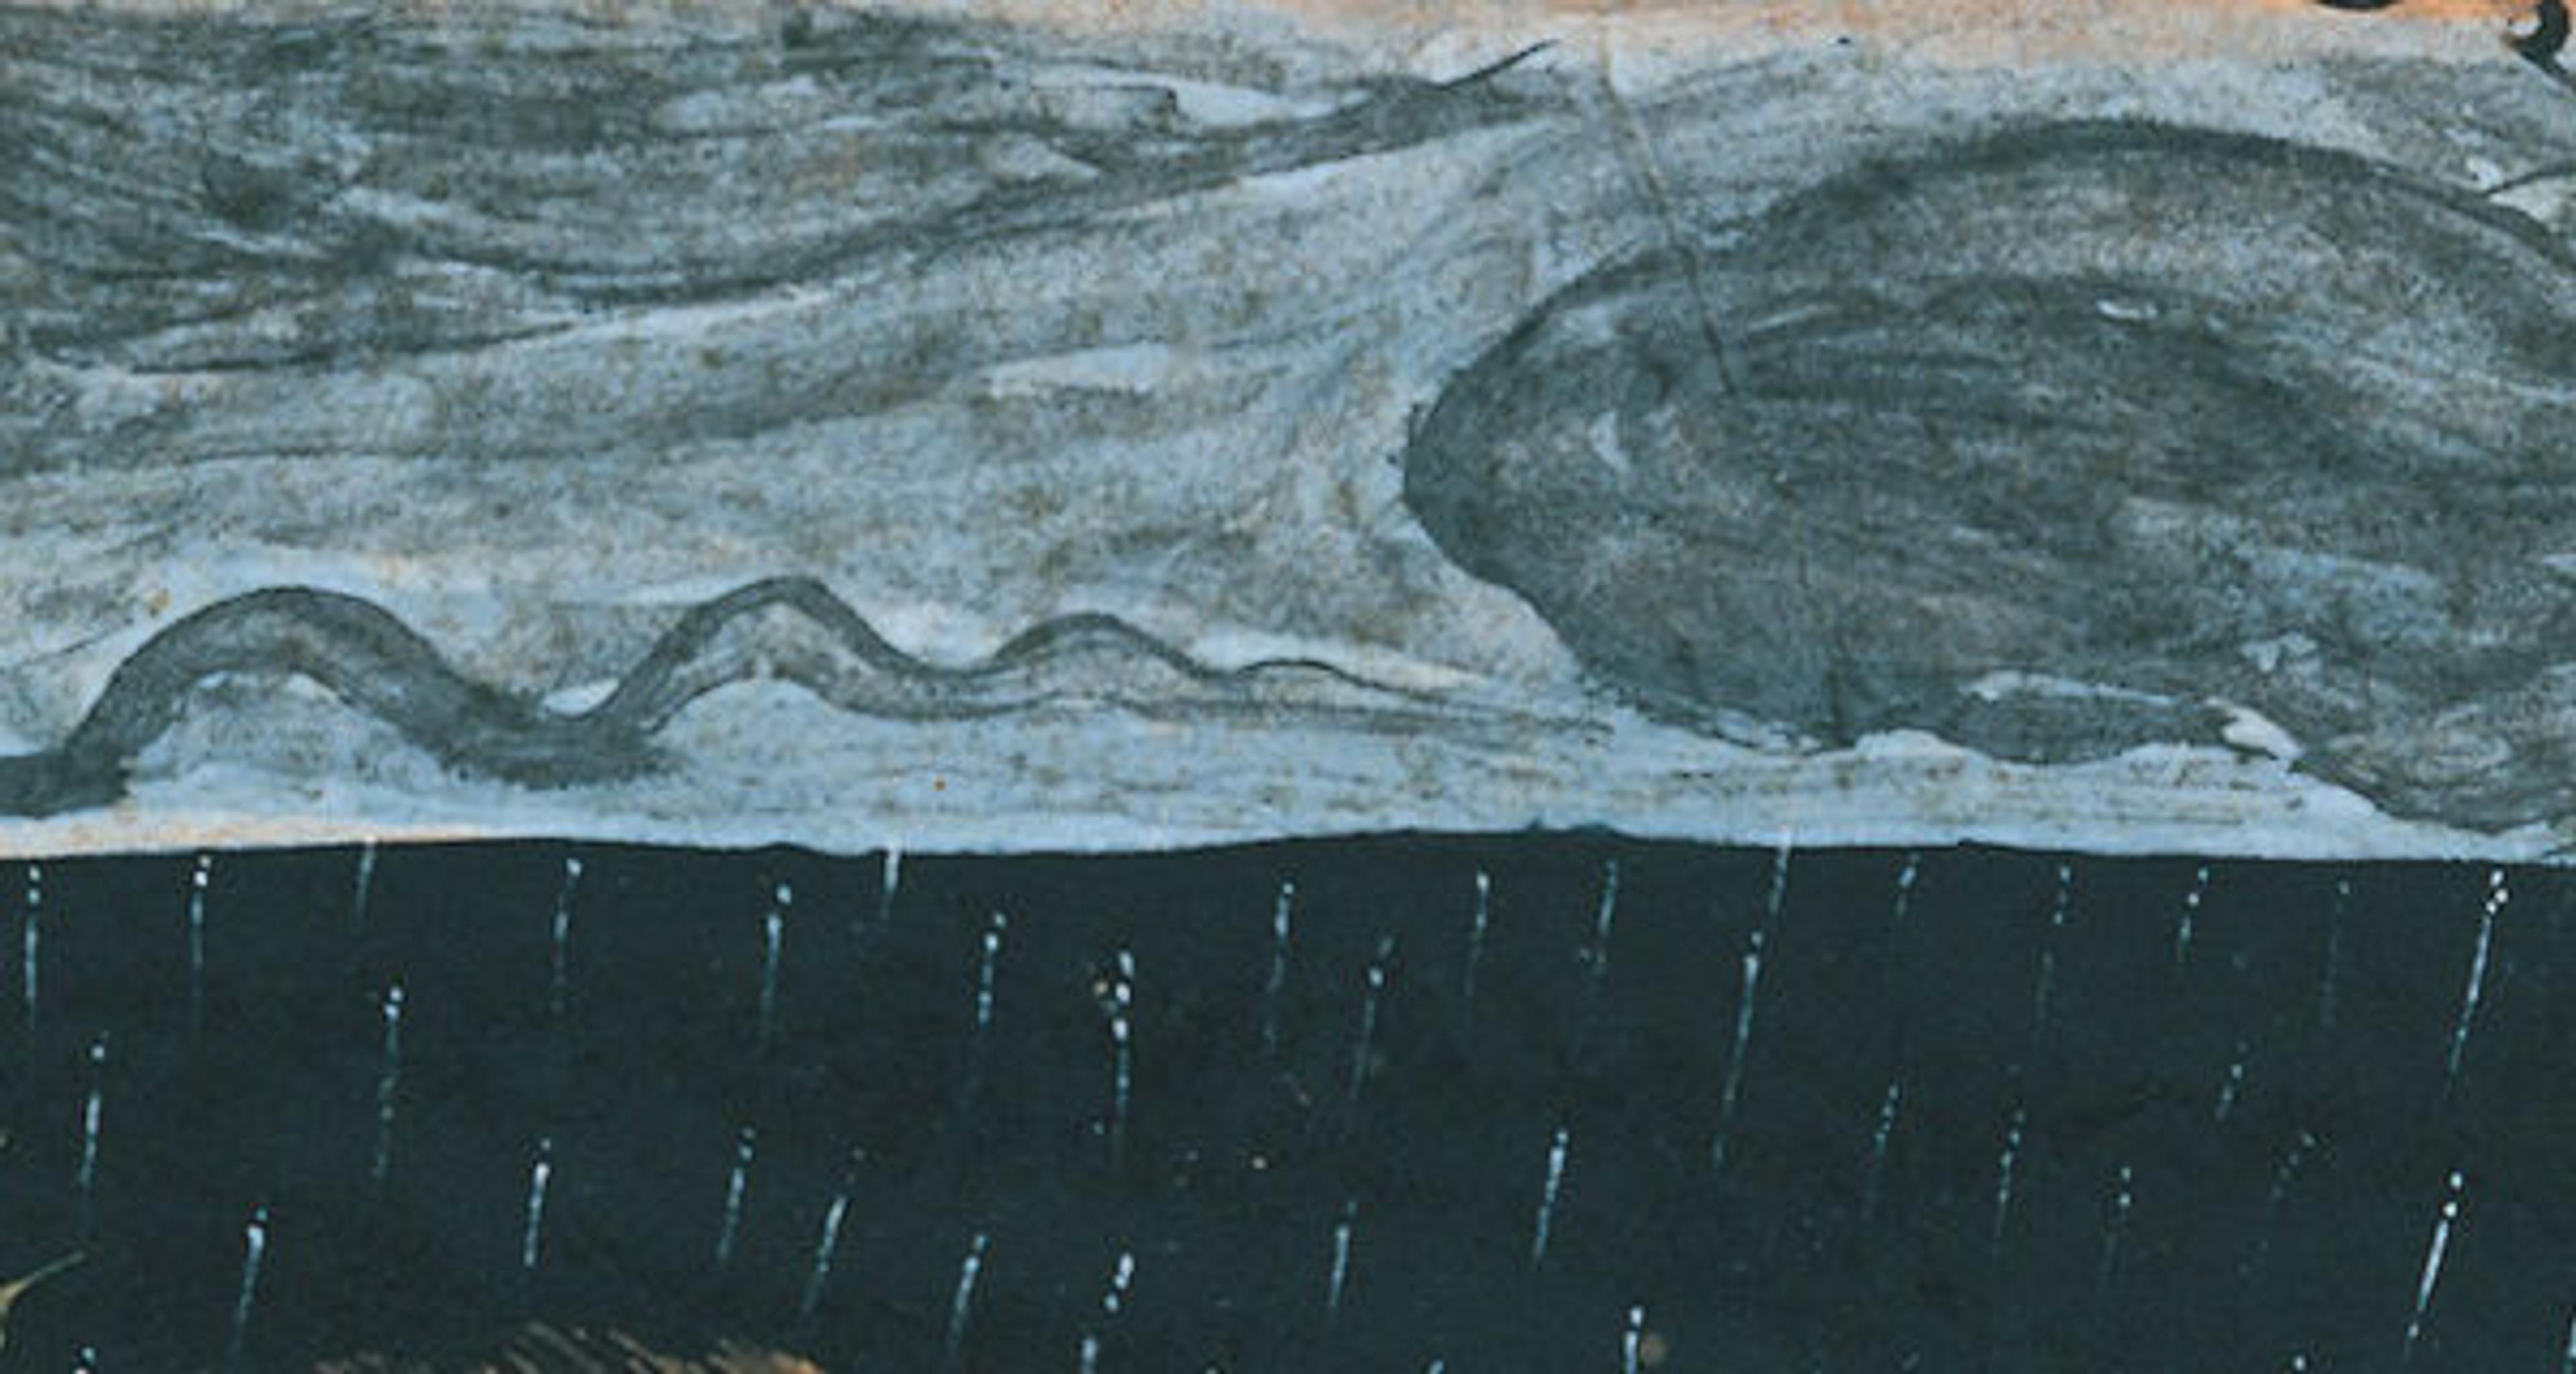 Detail view showing monsoon rains and sky